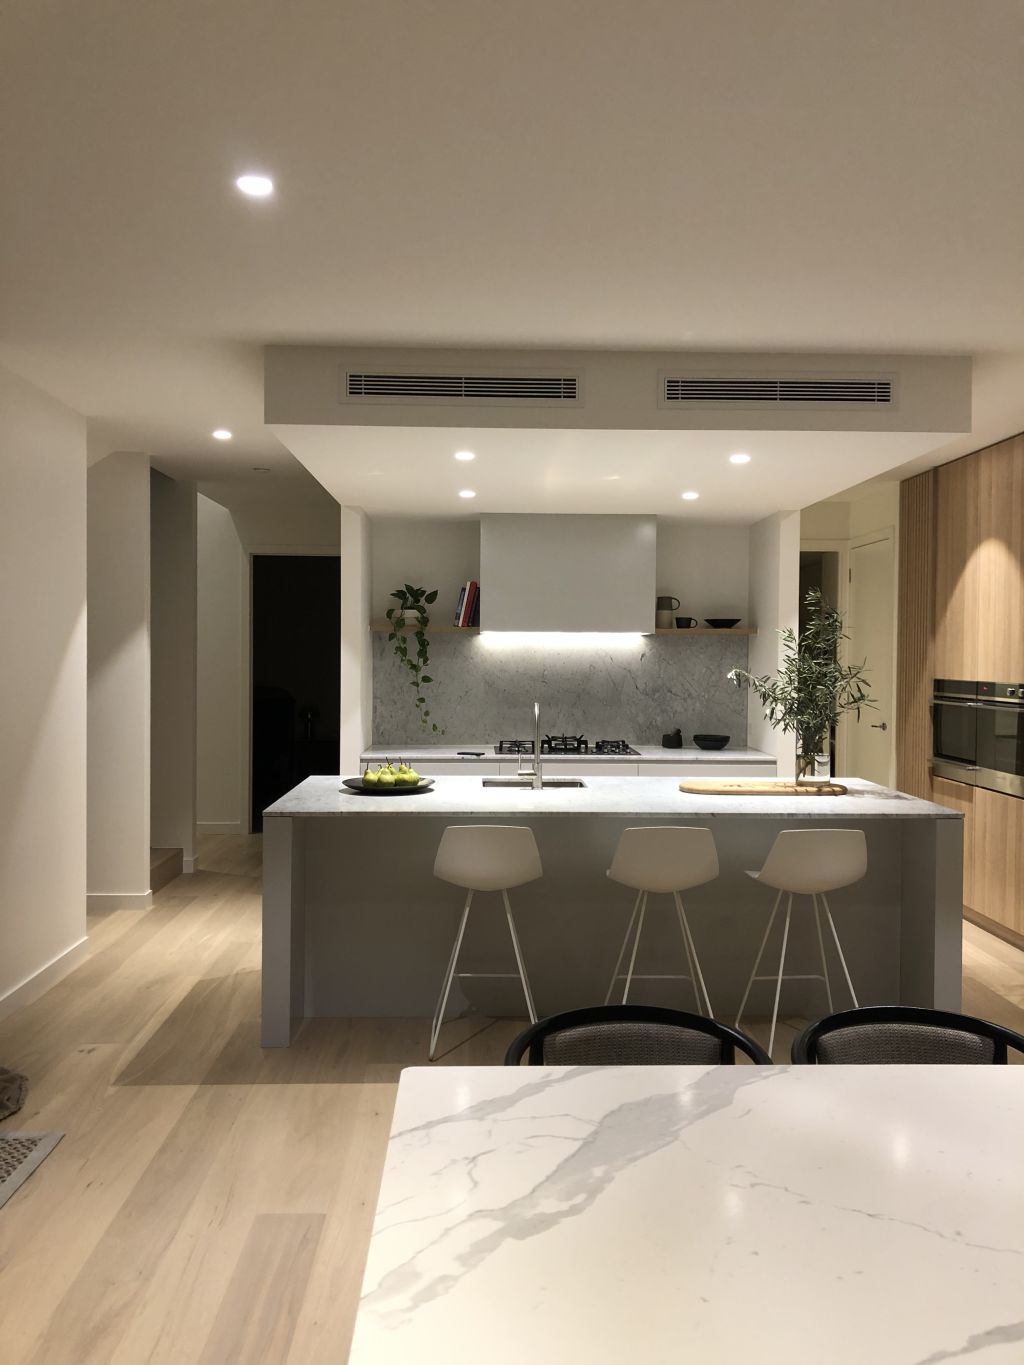 The kitchen at 13 Vista Road, Newtown, in one of Geelong's most coveted suburbs. Photo: Lucas Nieuwenhuys of BWRM.Australia